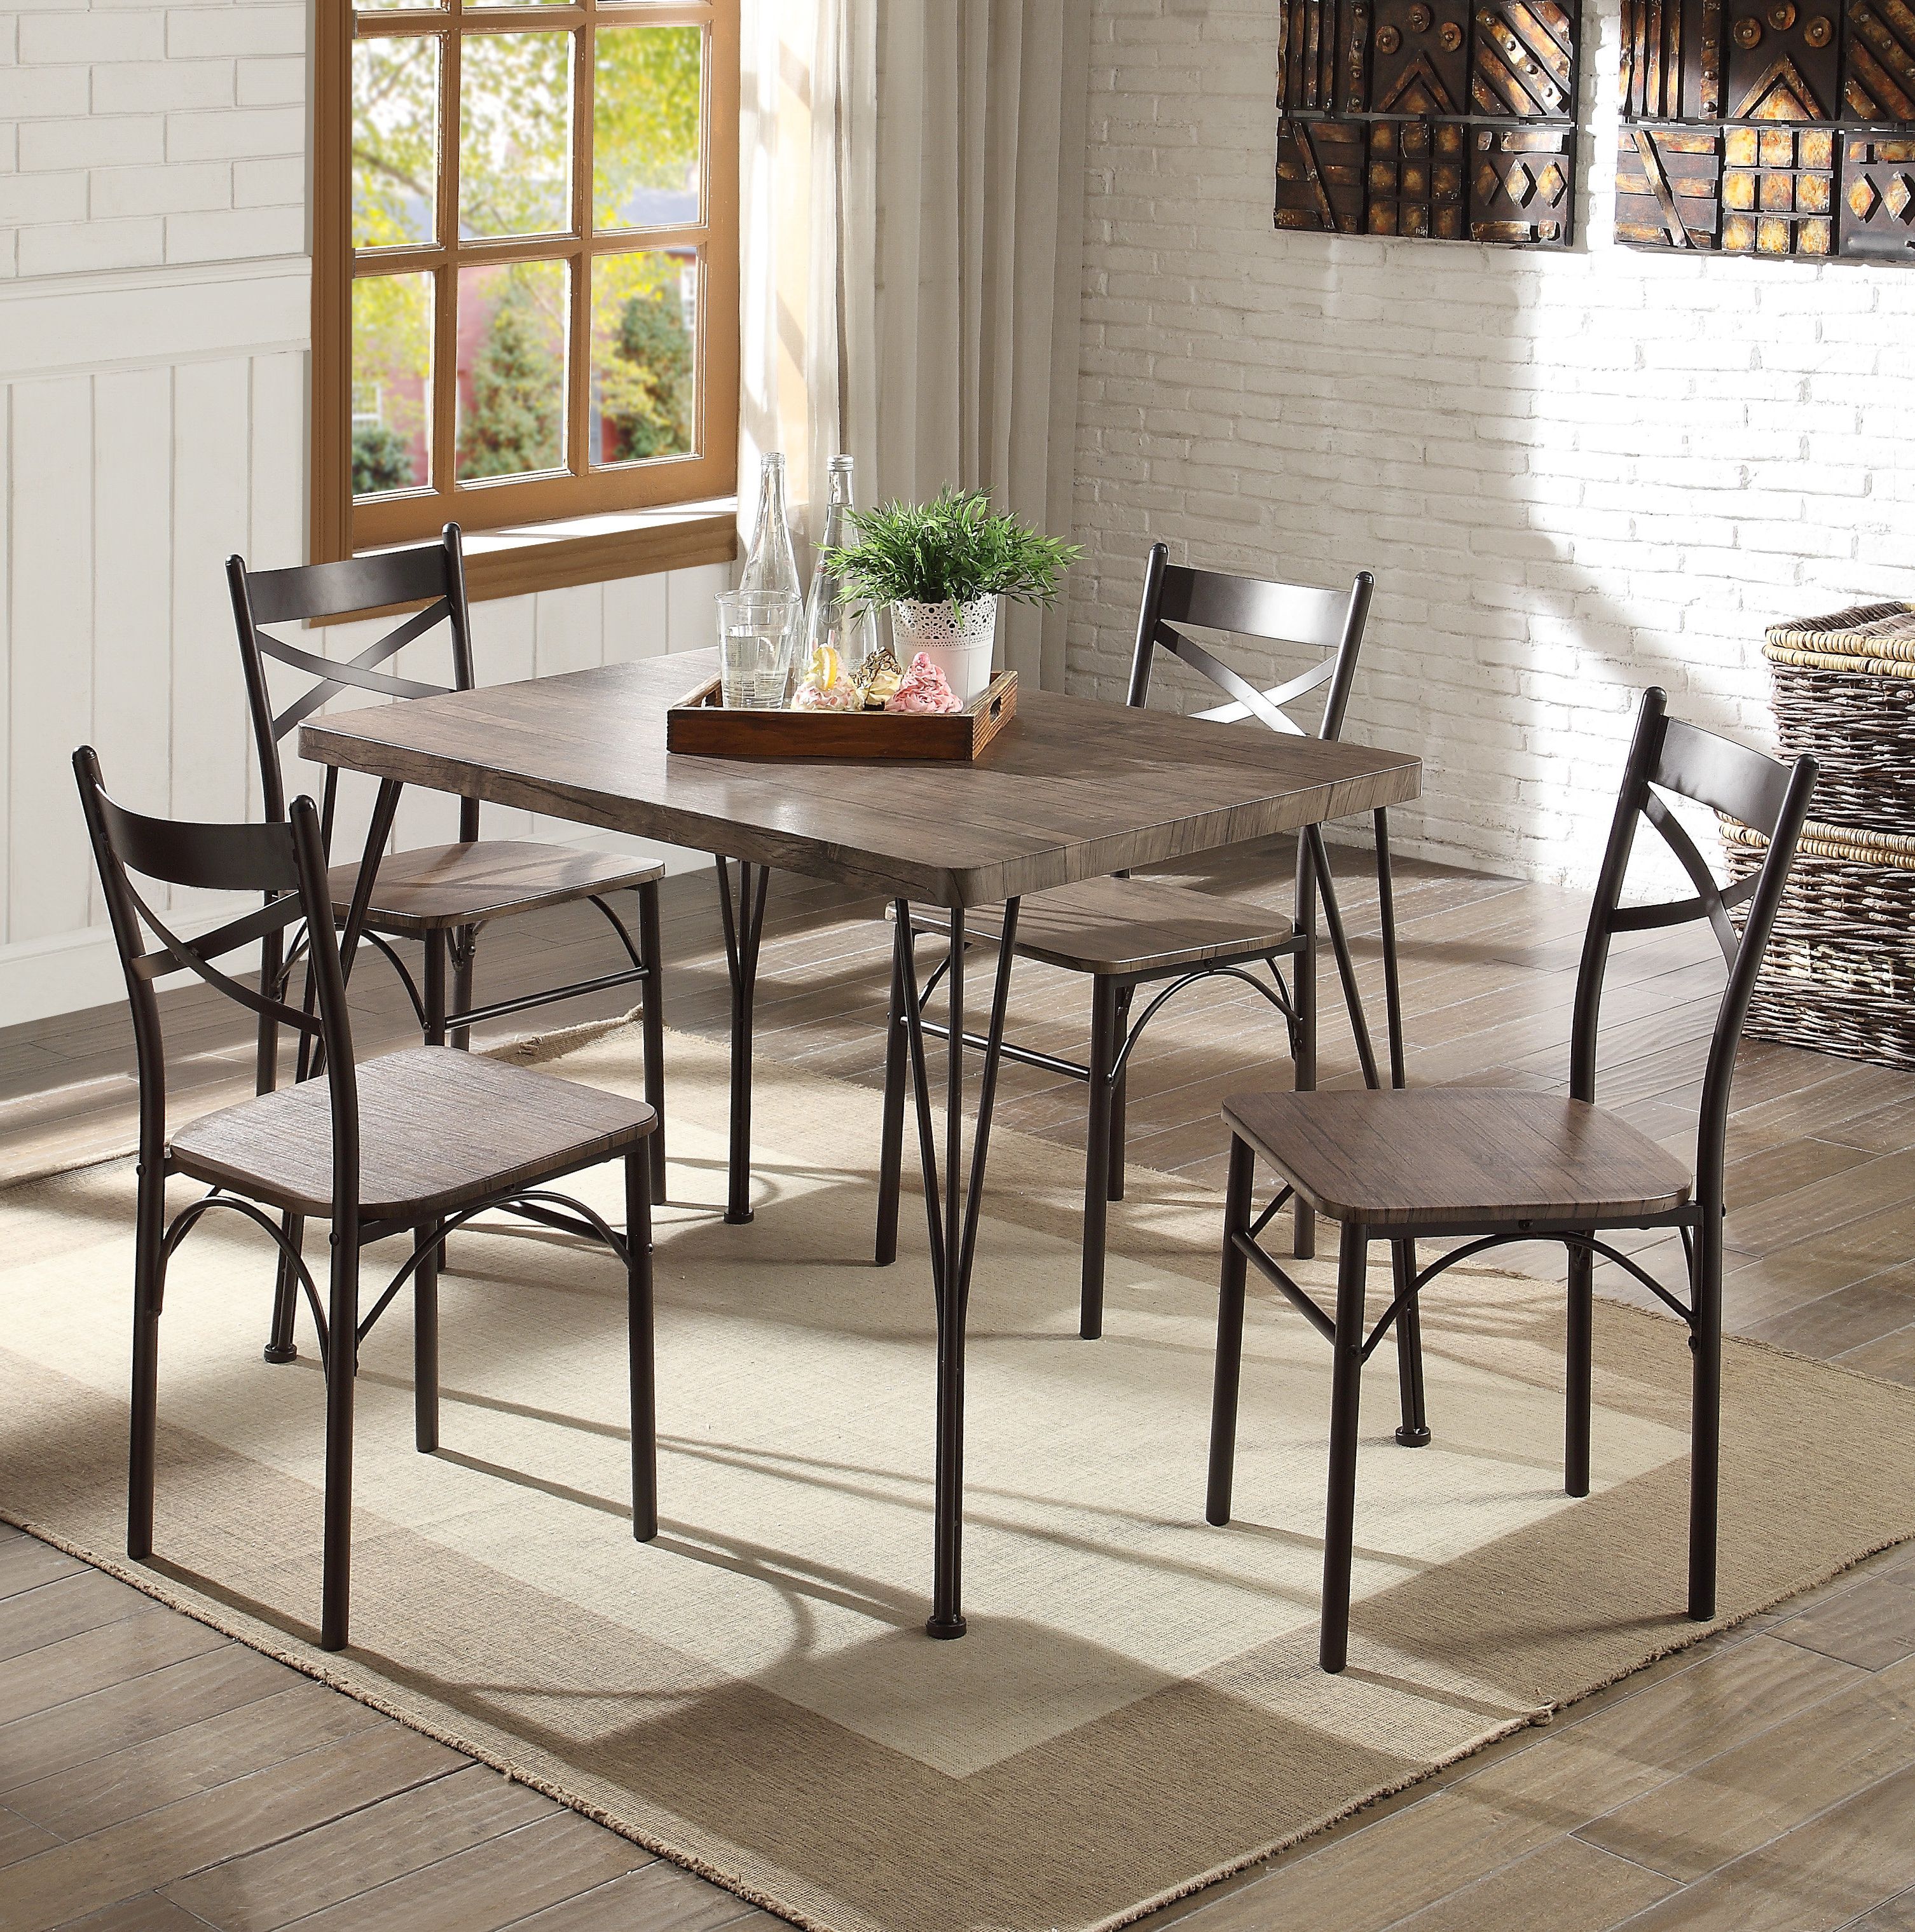 Wayfair With Regard To Taulbee 5 Piece Dining Sets (View 13 of 25)